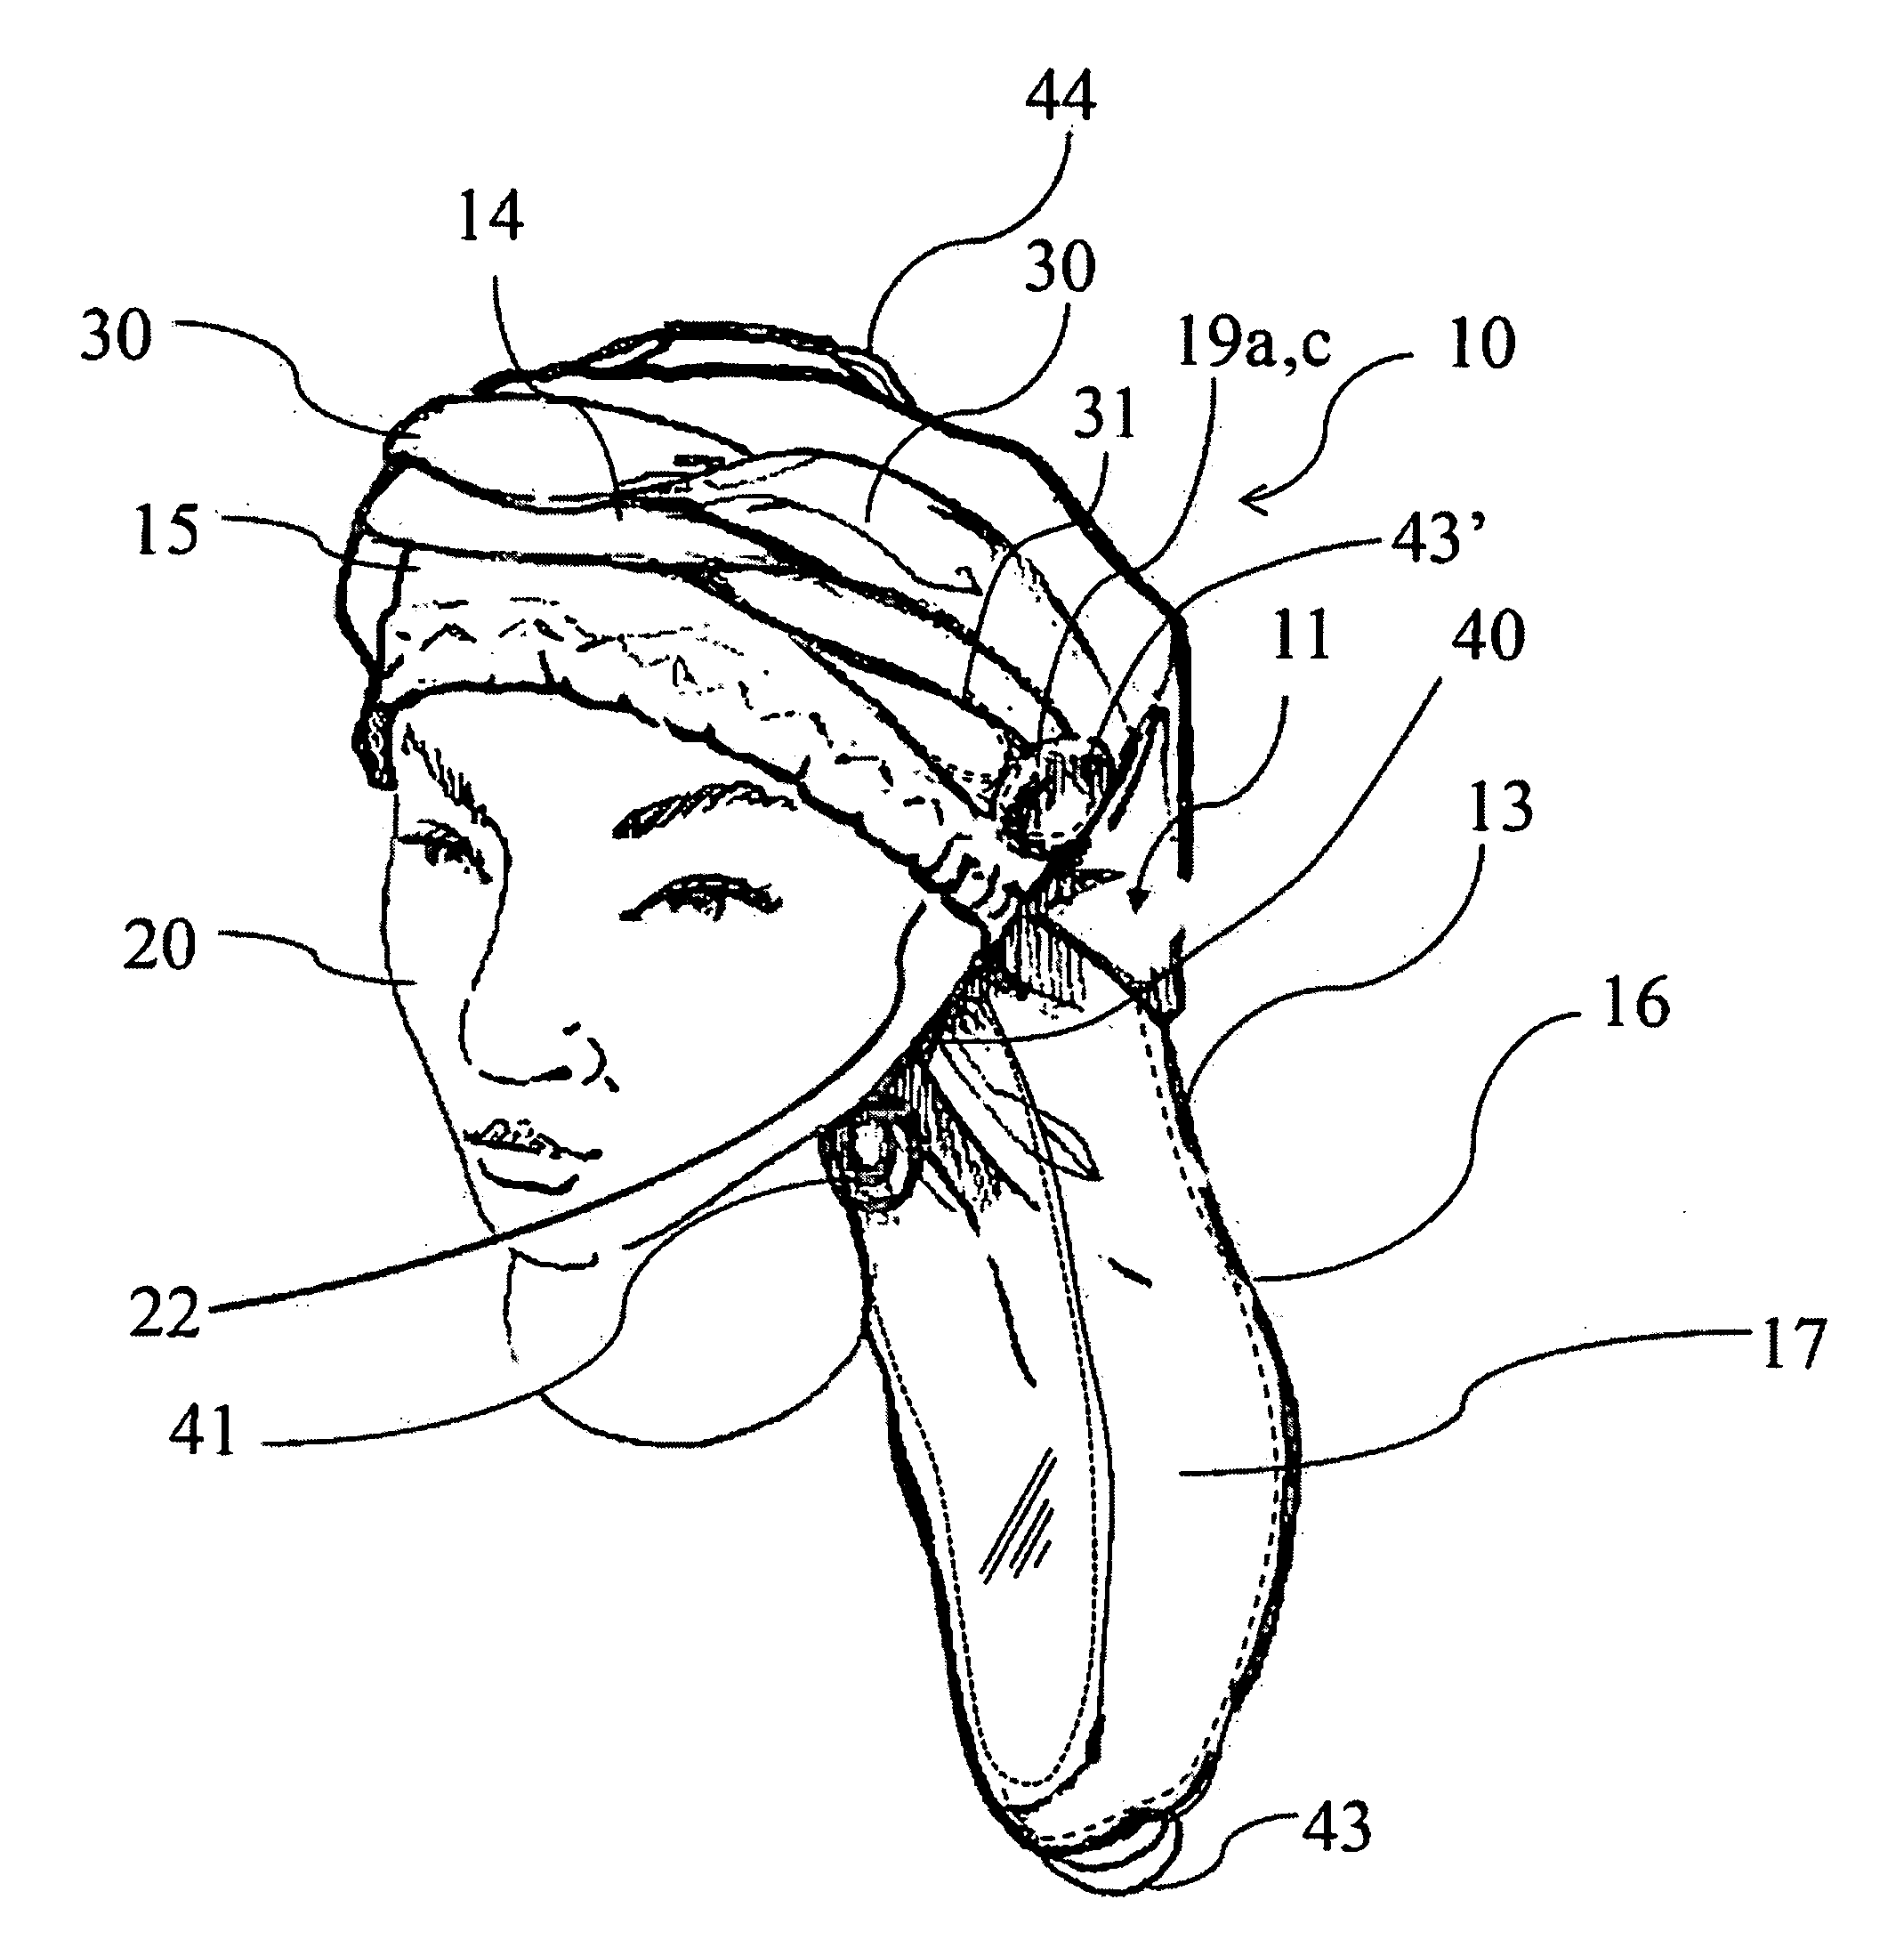 Head hair wrap cap for covering or protecting the head and/or hair